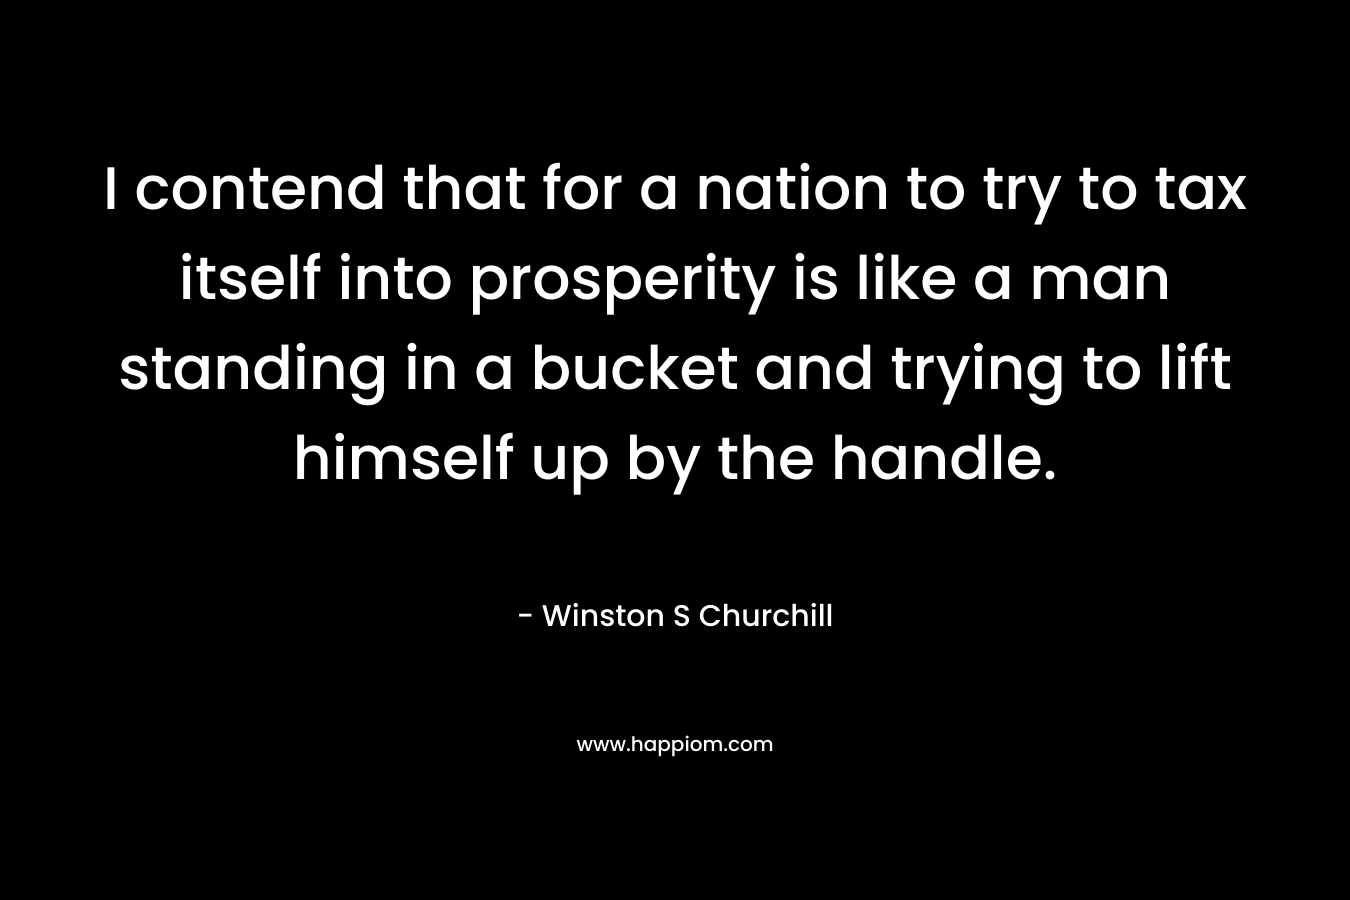 I contend that for a nation to try to tax itself into prosperity is like a man standing in a bucket and trying to lift himself up by the handle.